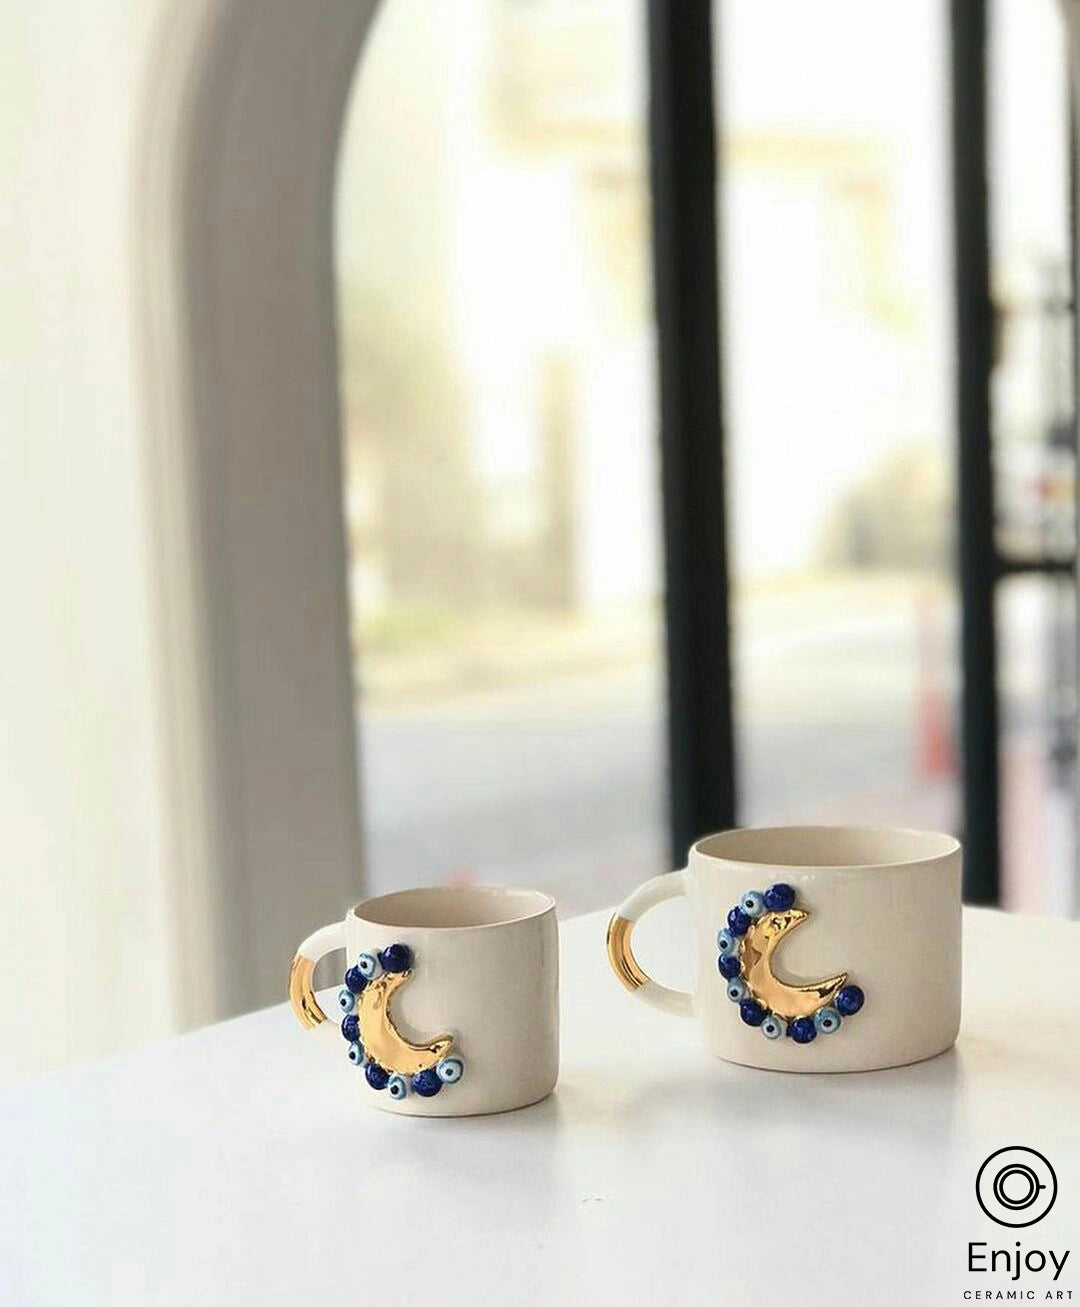 Two 'Blue Moon' ceramic mugs with gold handles and intricate blue beadwork on the crescent moon, elegantly set against the soft blur of a café window.